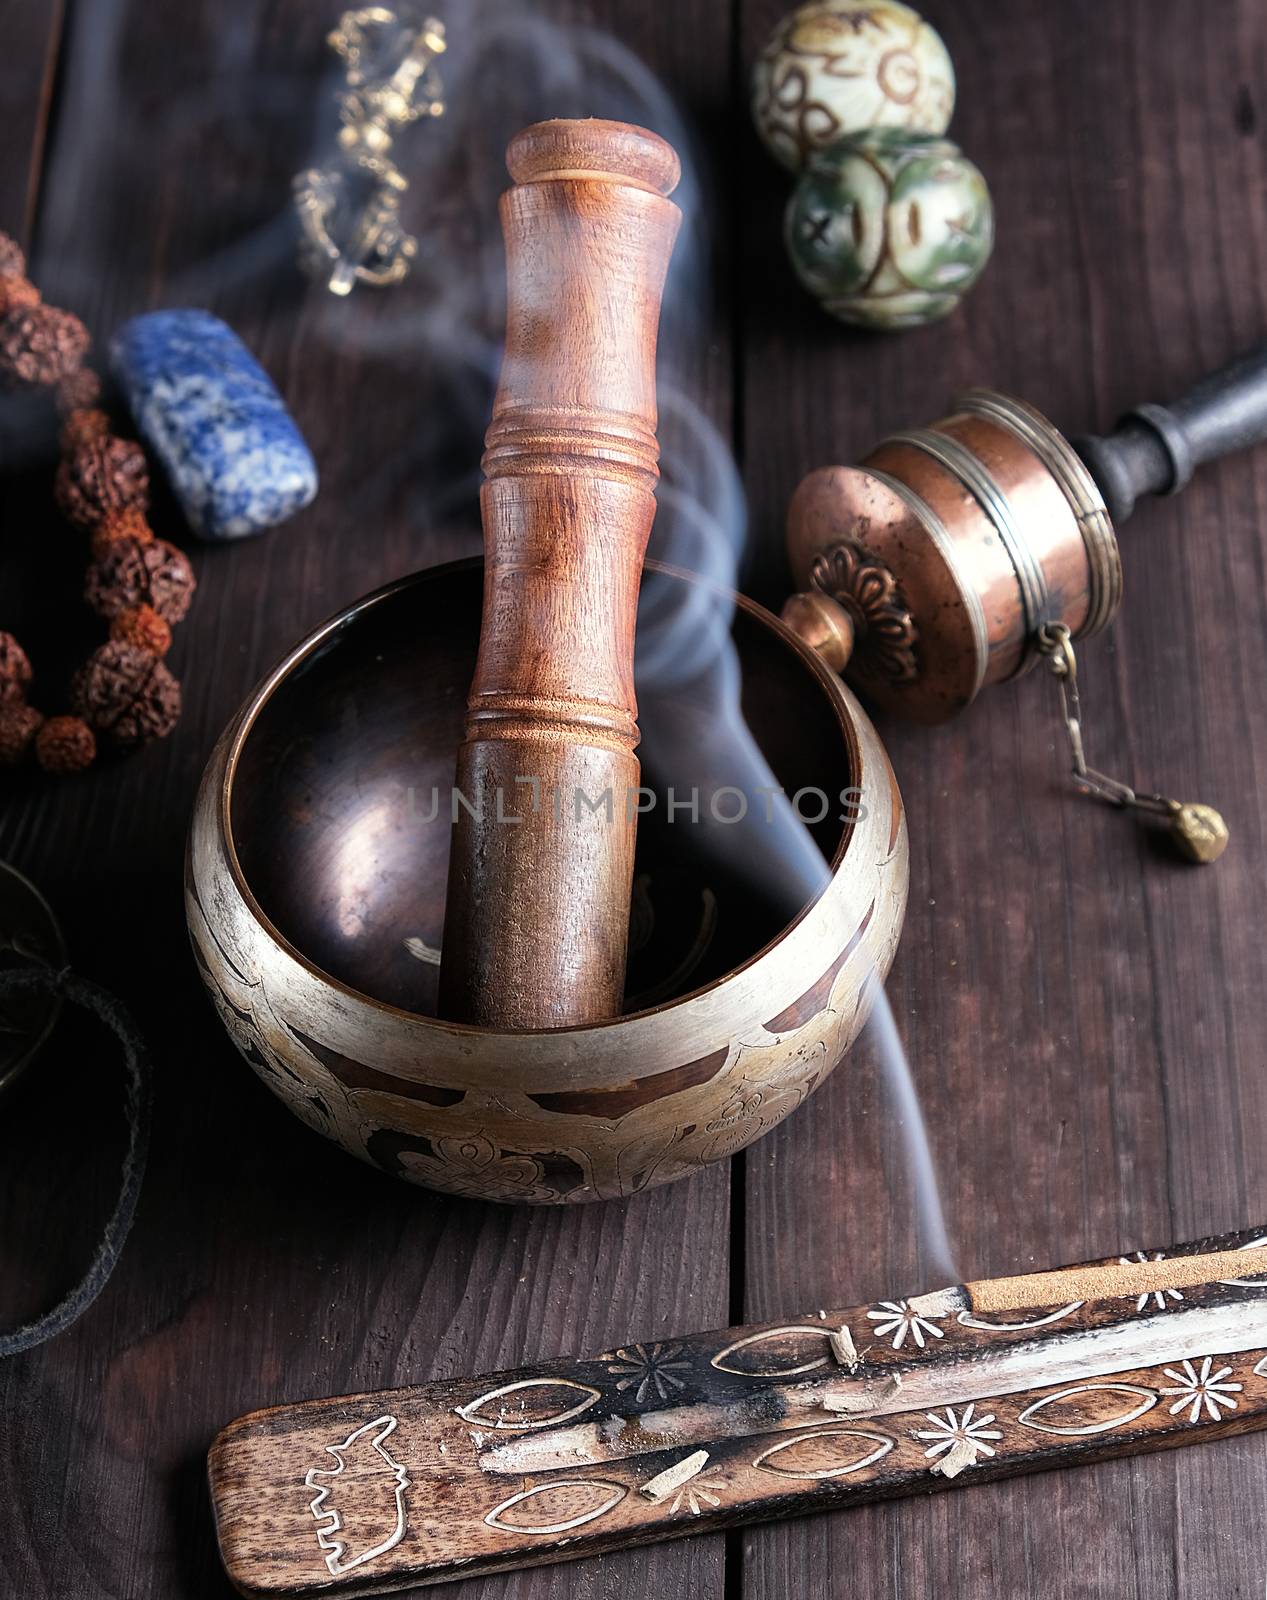 copper singing bowl and a wooden stick on a brown table